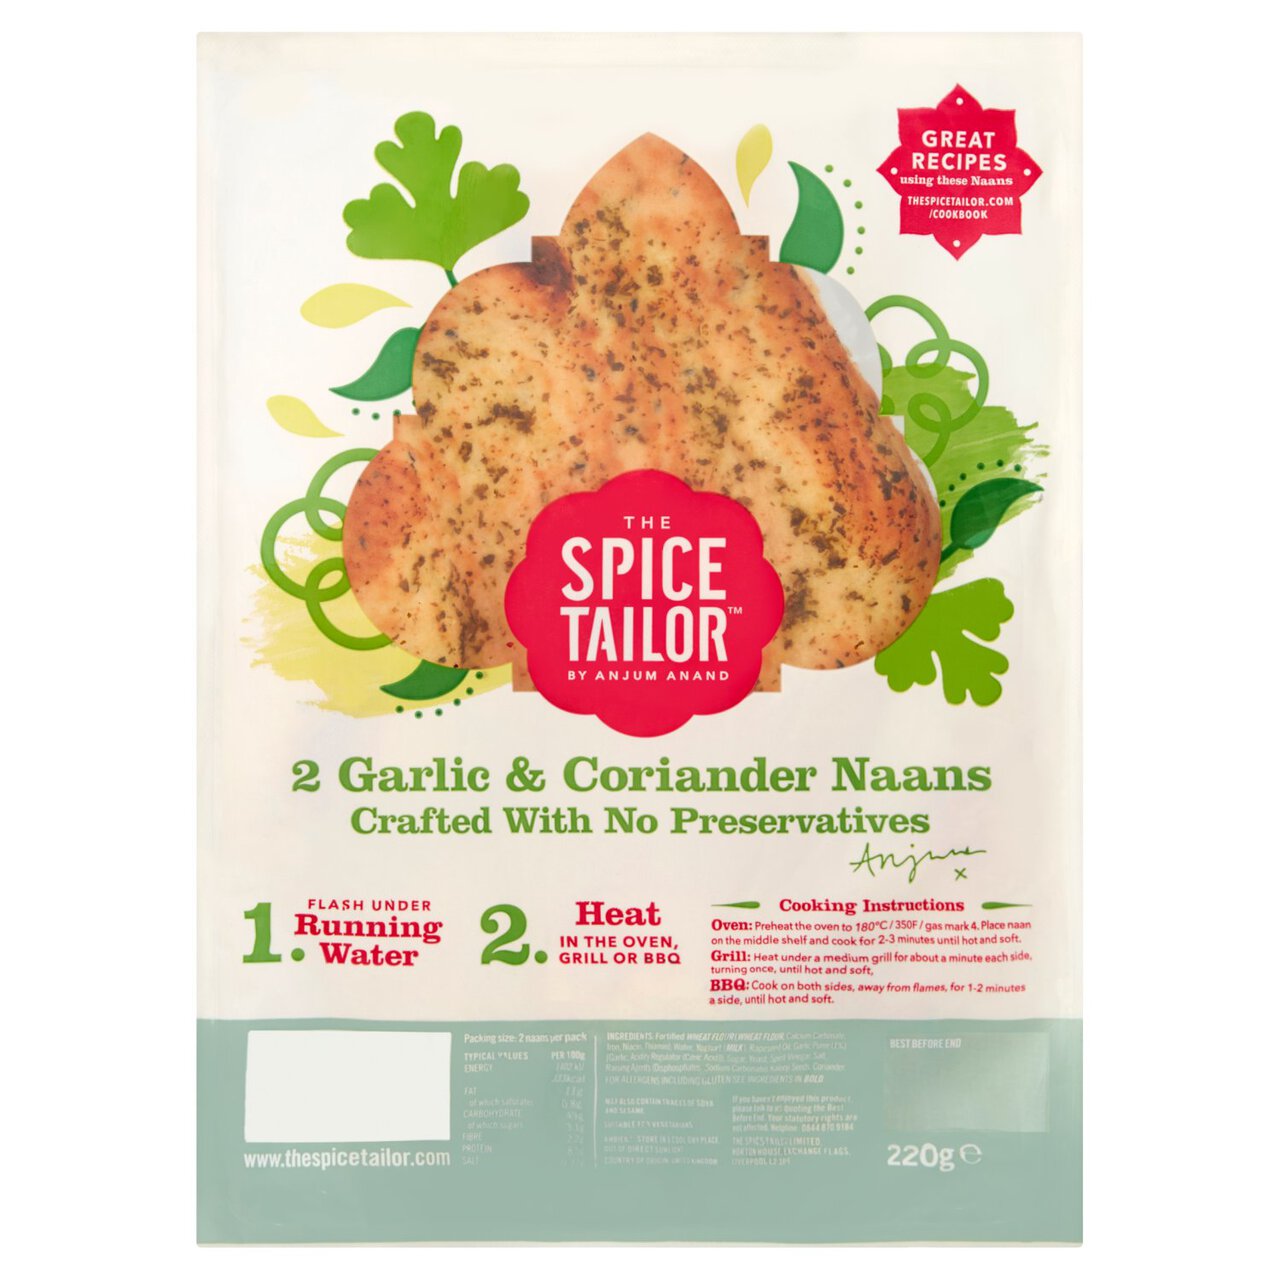 The Spice Tailor 2 Garlic & Coriander Naans 2 per pack